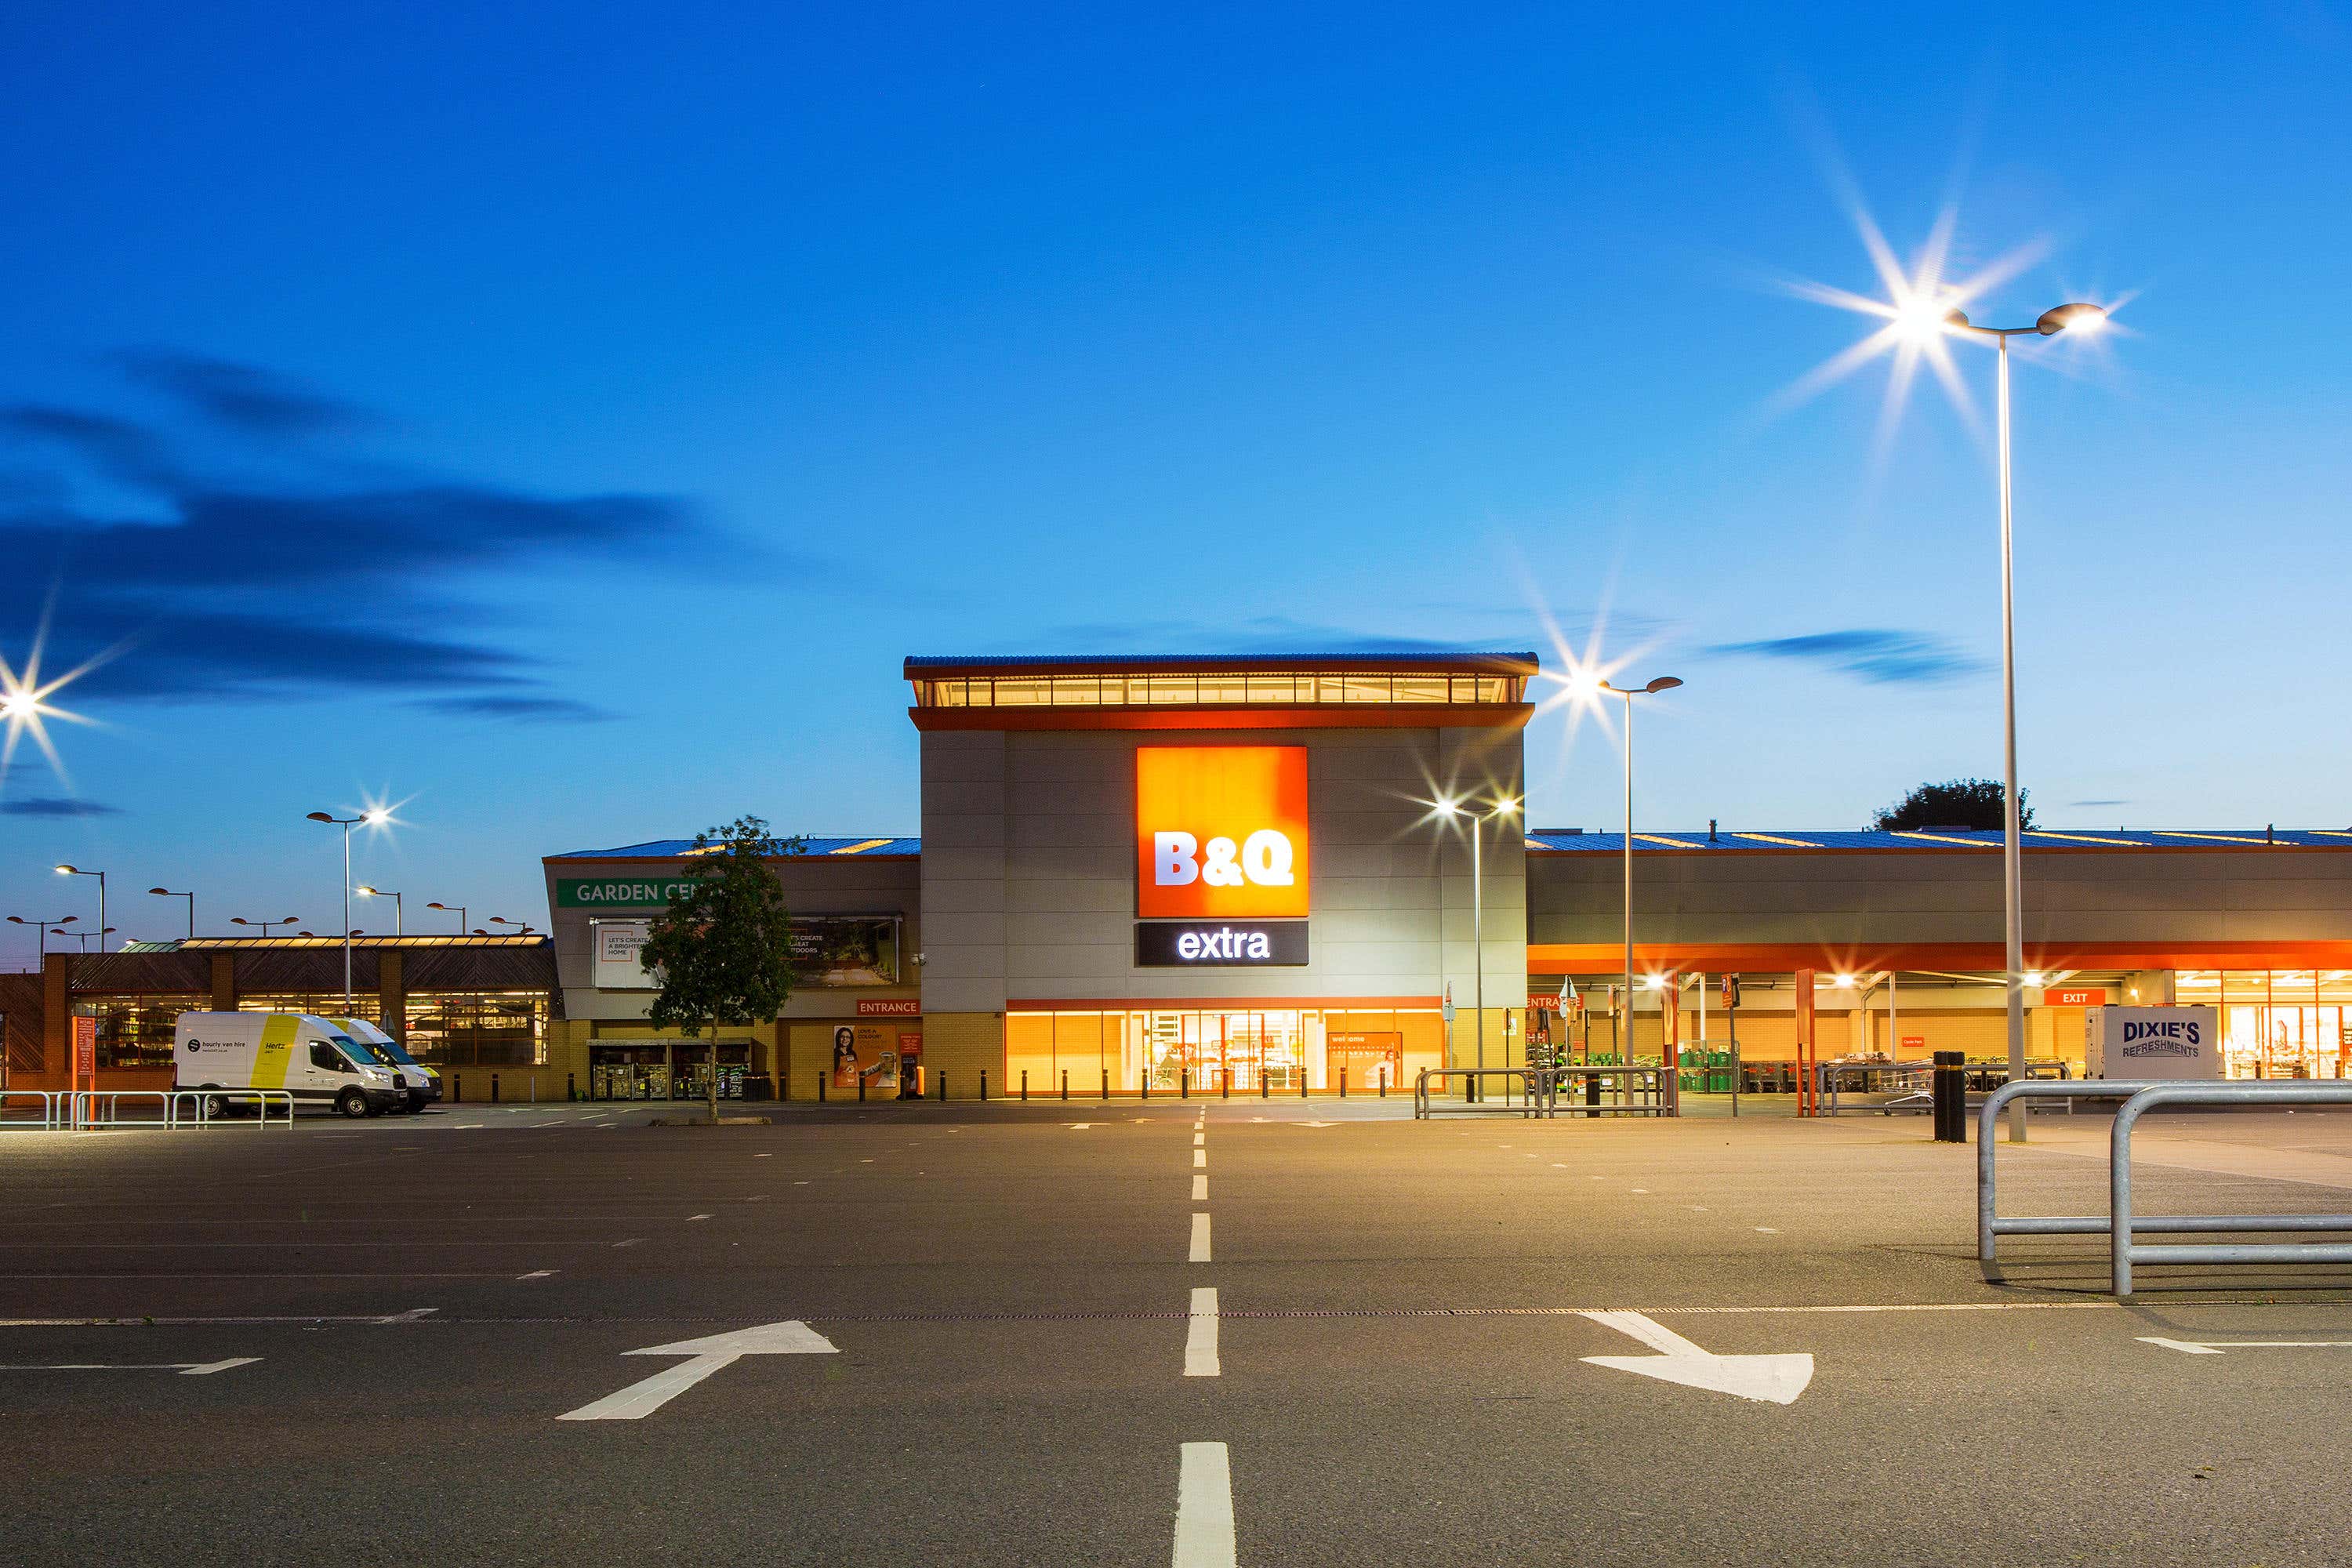 B&Q owner Kingfisher has cut its full-year earnings outlook after profits dropped by a third, with wet weather and low consumer confidence dampening sales in Europe (Alamy/PA)